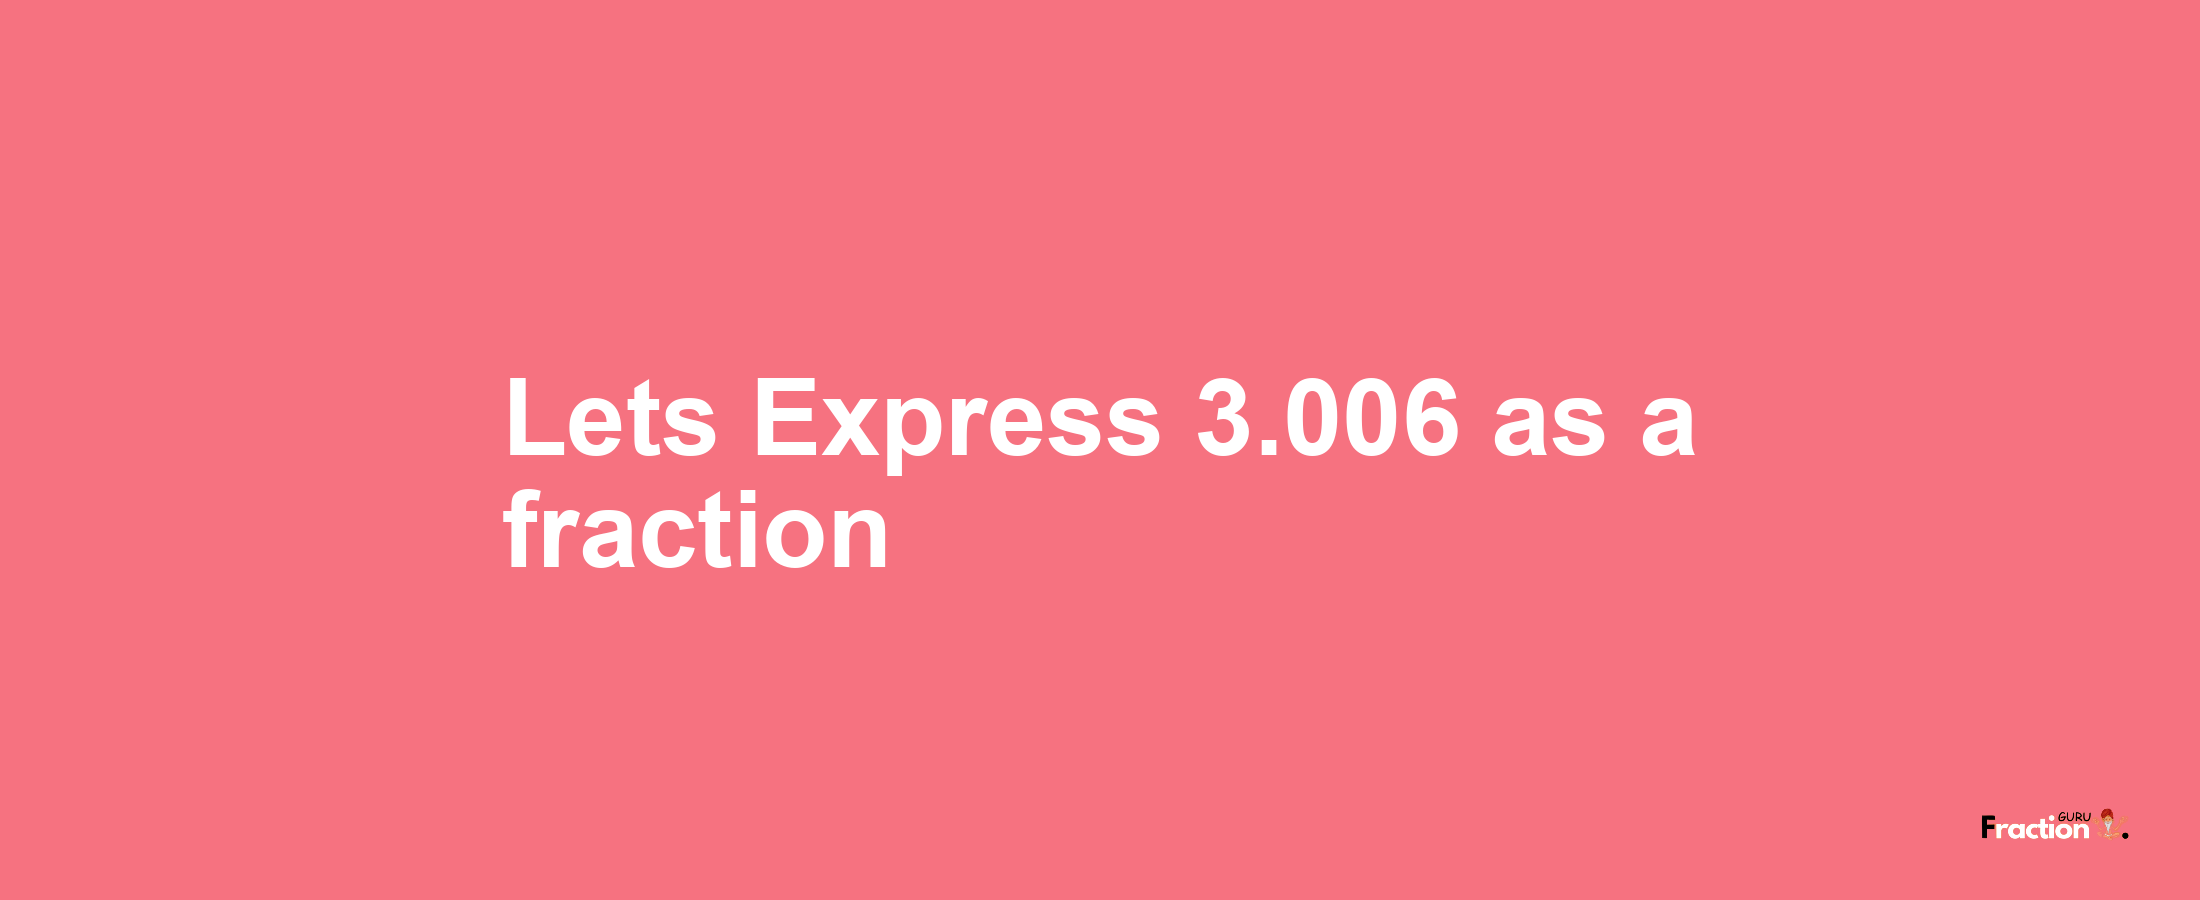 Lets Express 3.006 as afraction